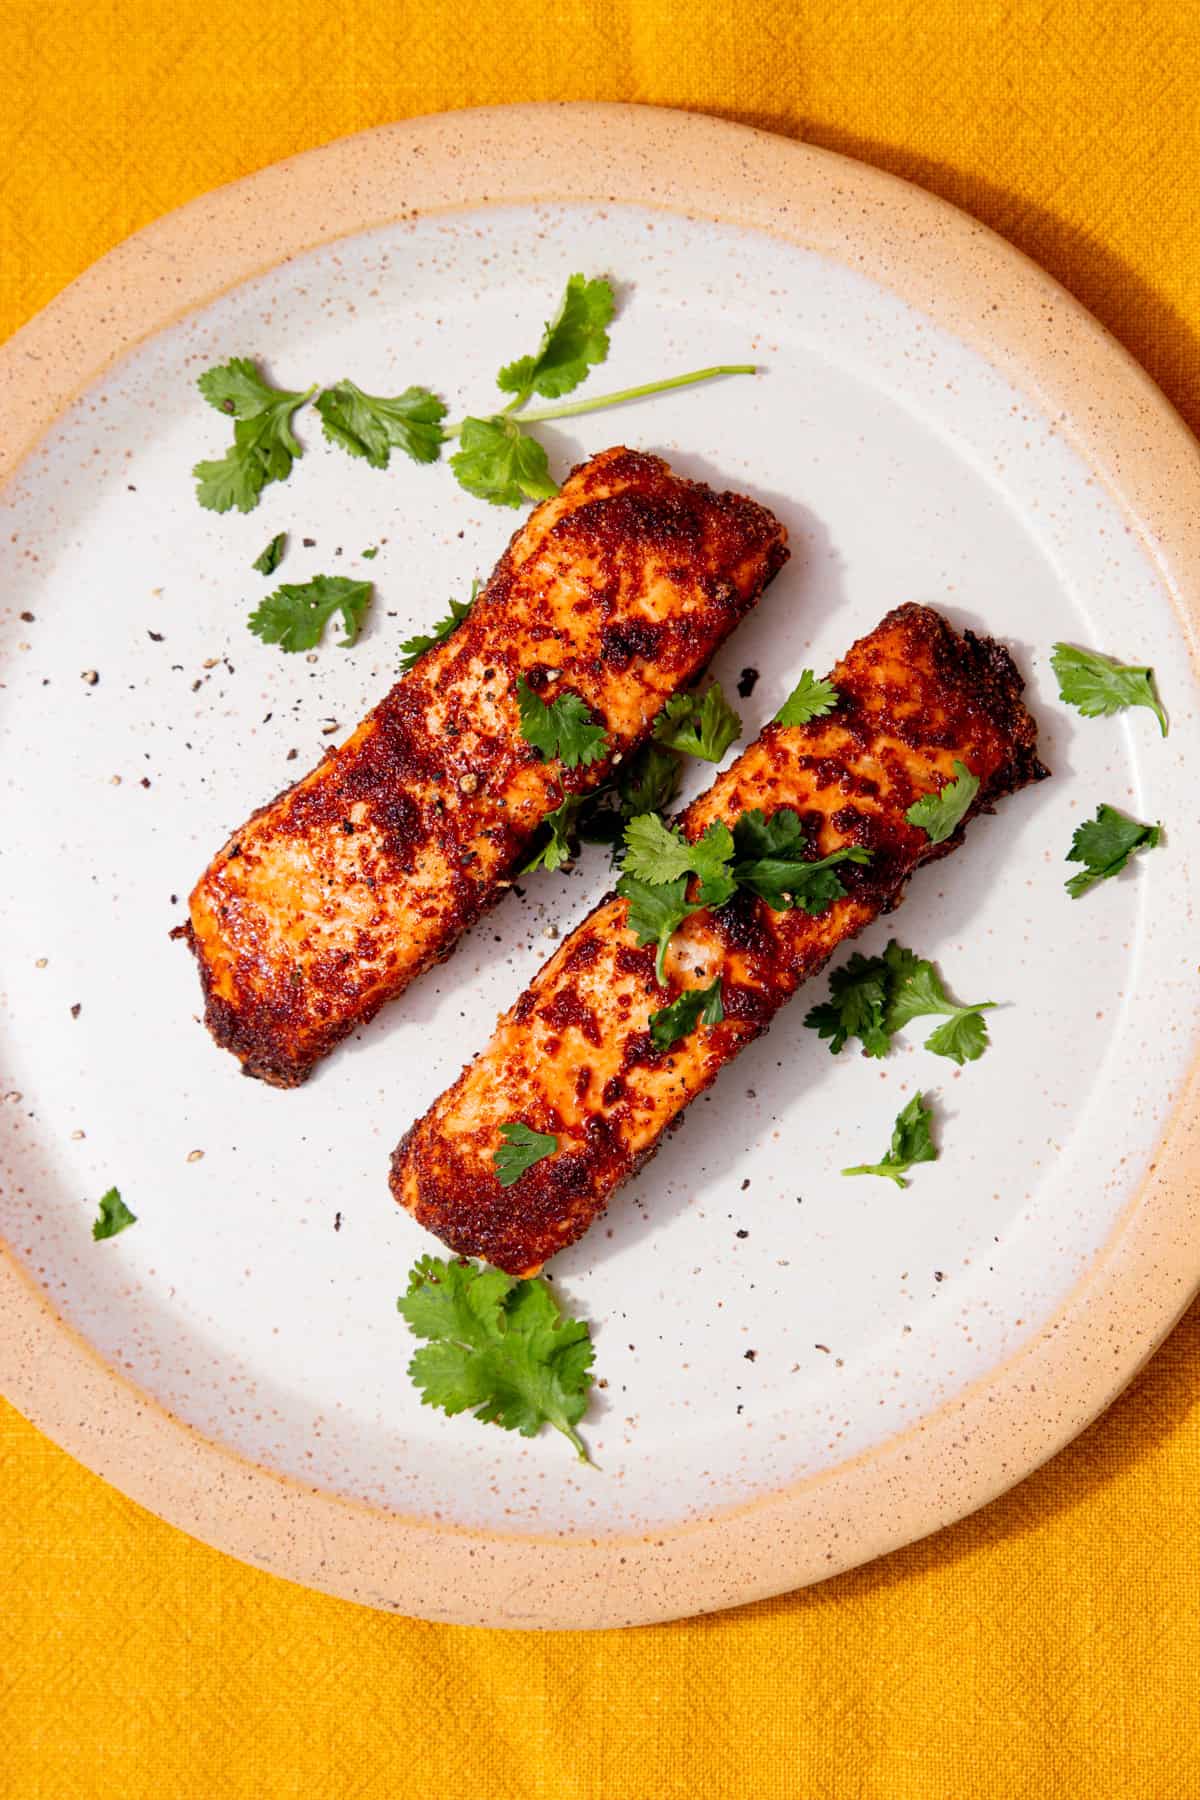 2 cooked salmon fillets with a coating of darker browned seasoning on a plate and some fresh coriander on a mustrad background.